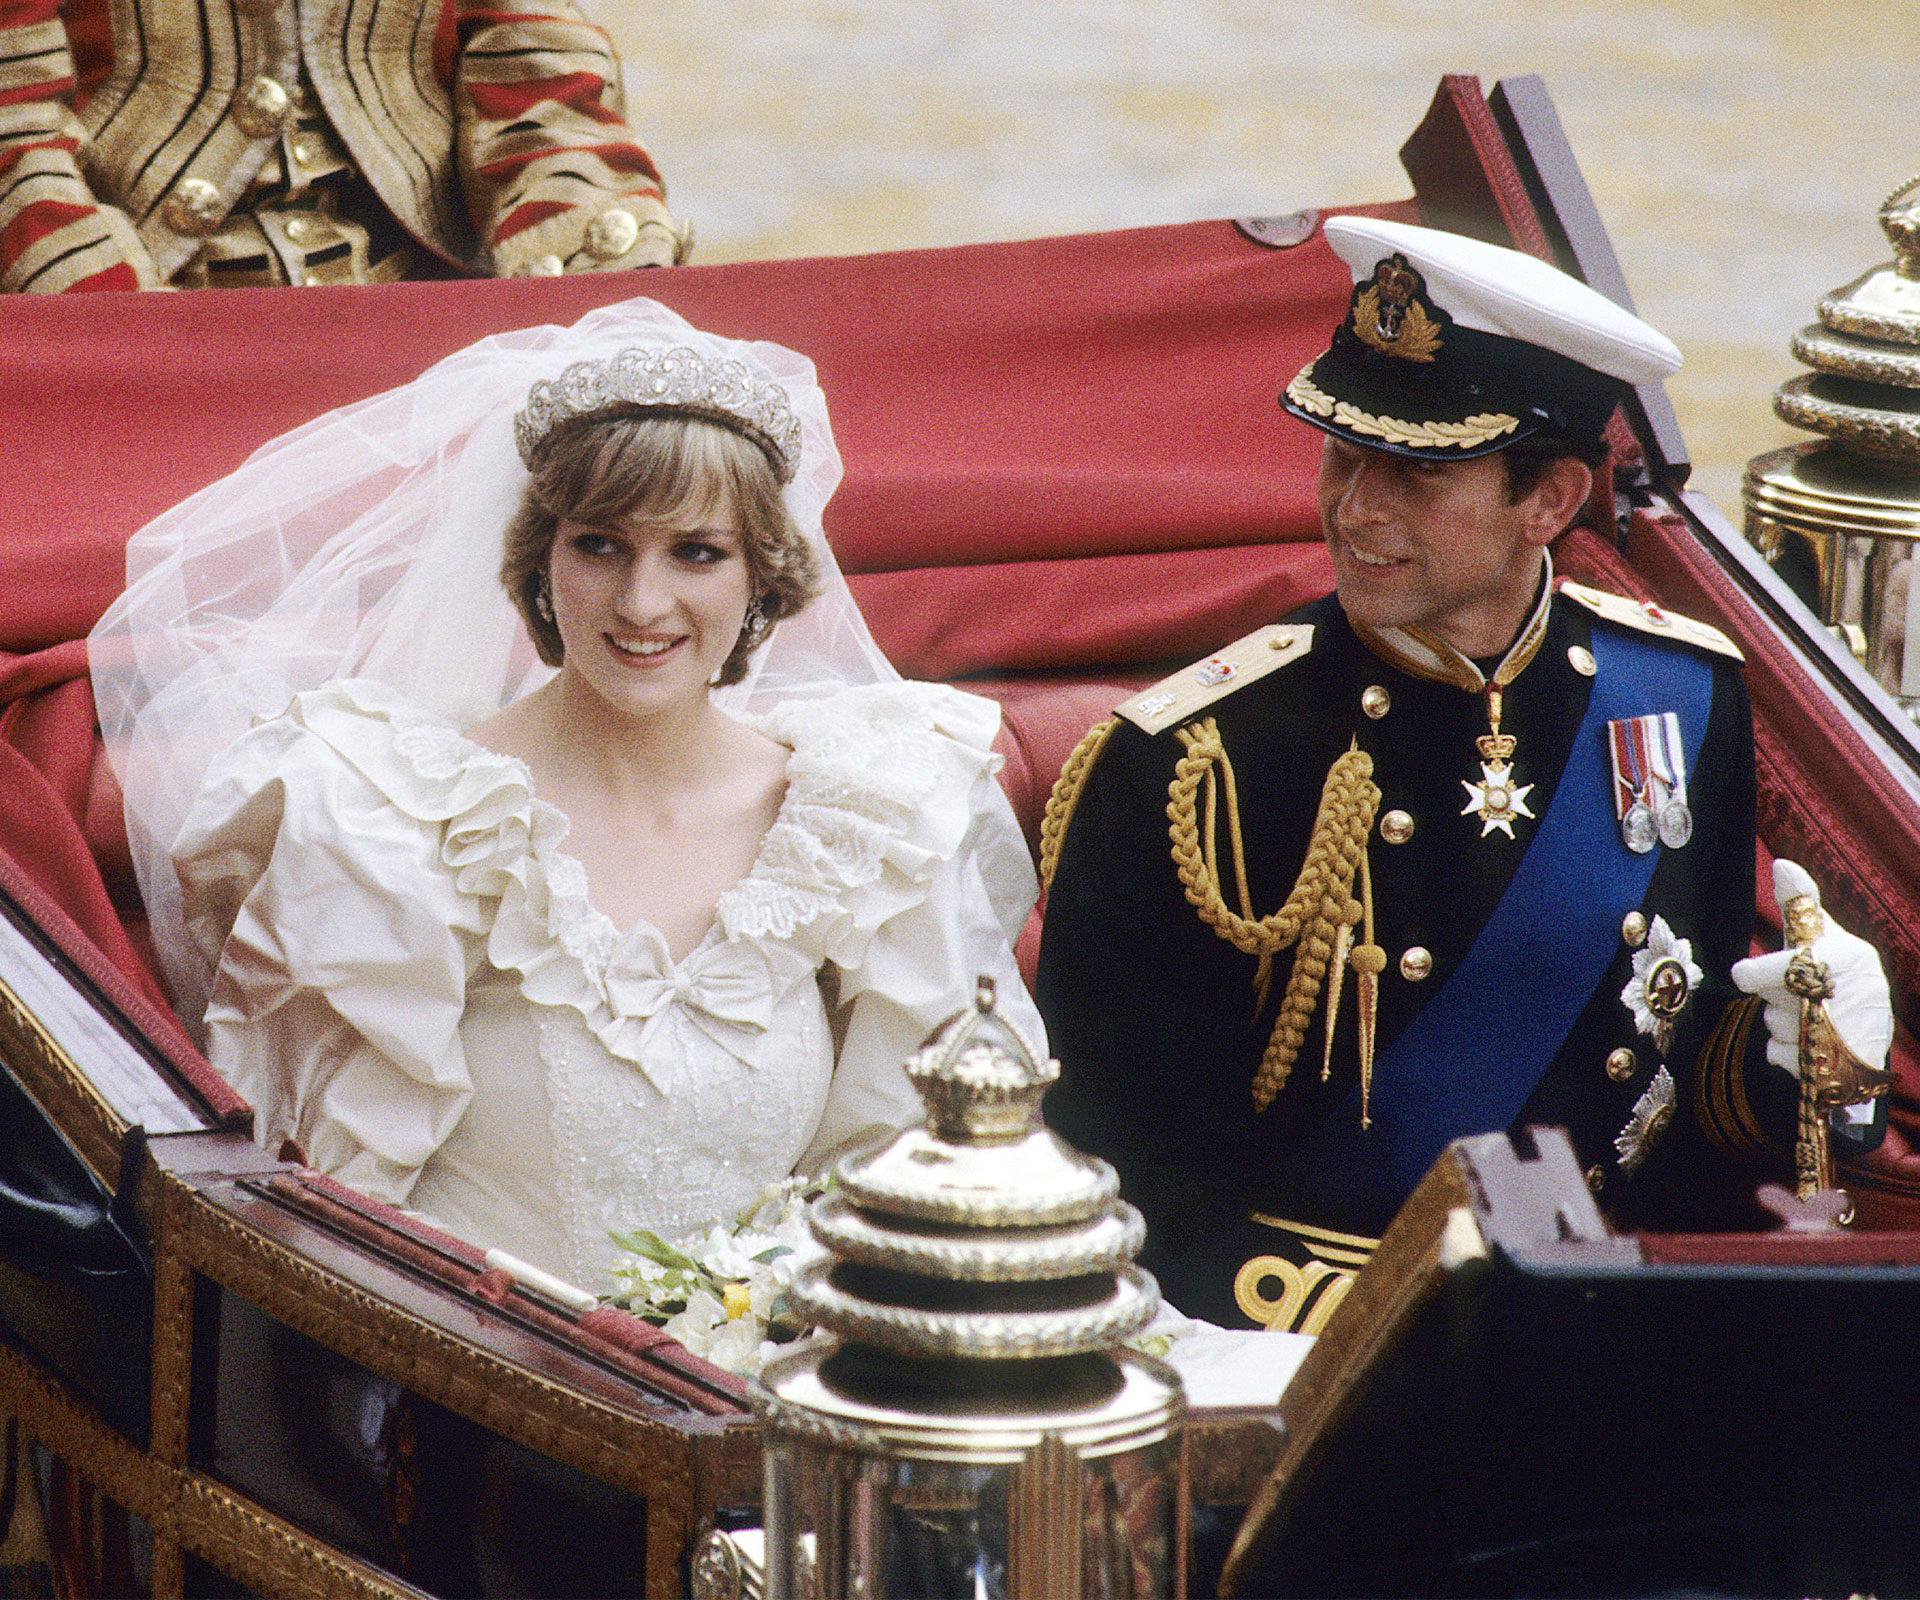 In pictures: Royal weddings through the years